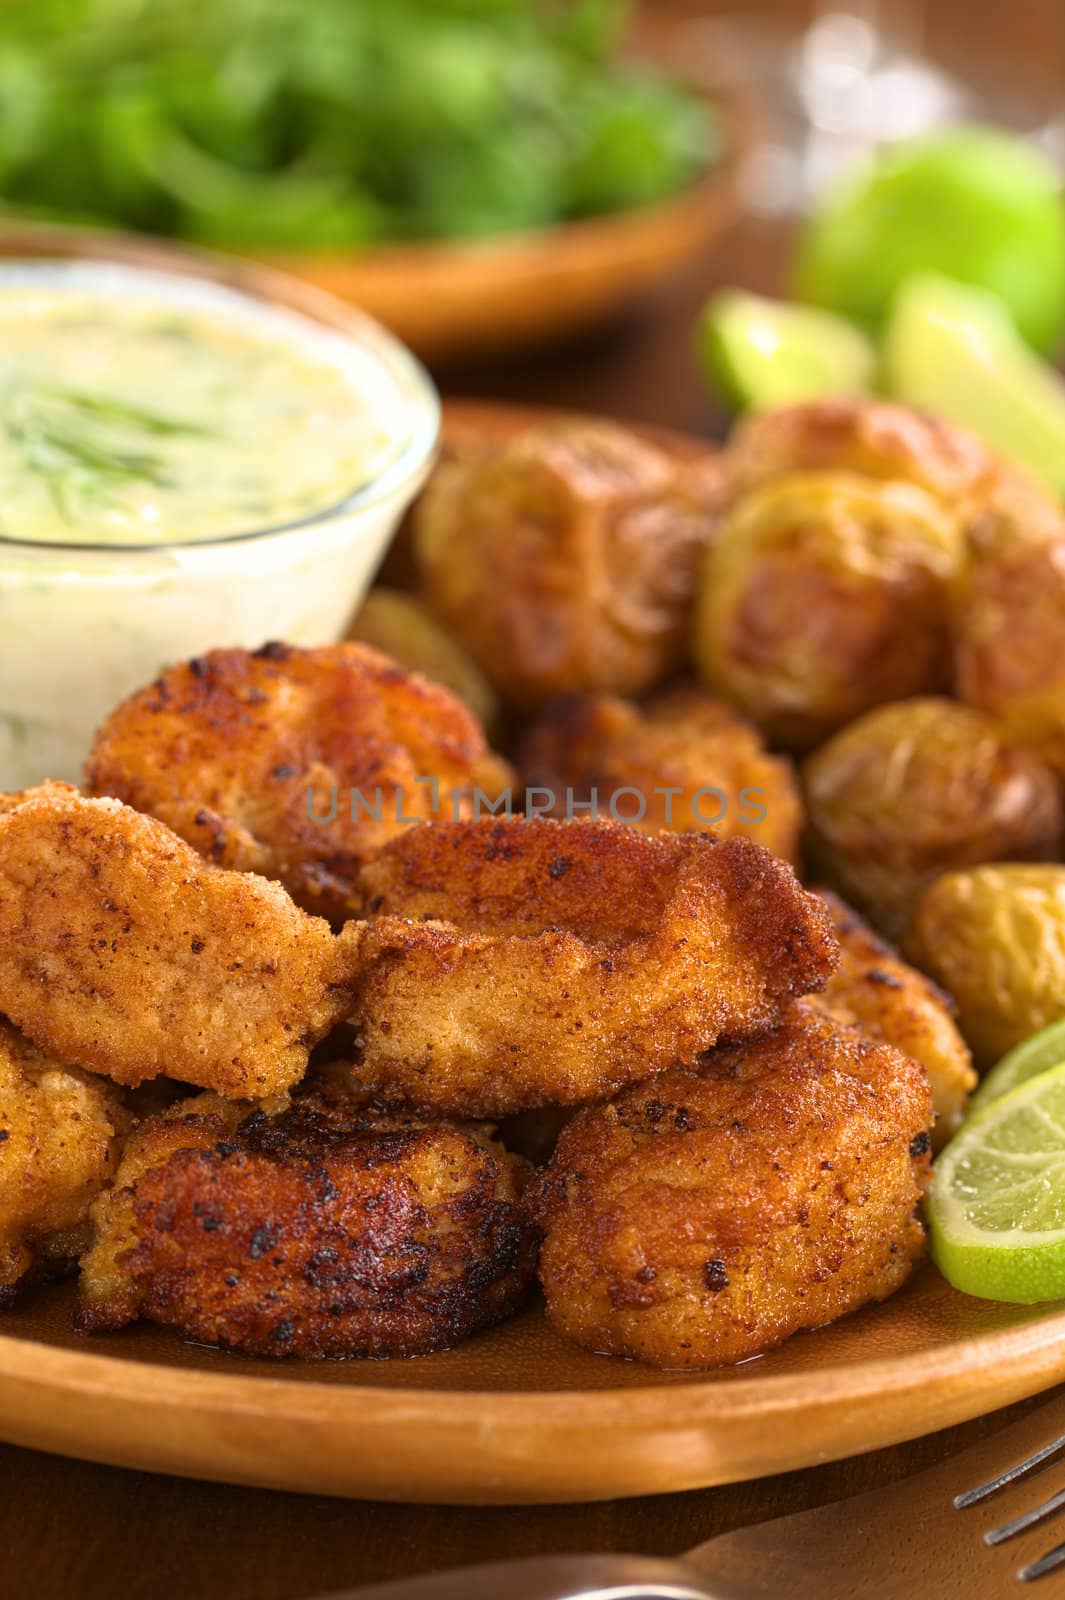 Breaded fried calamary pieces with small baked potatoes and tzatziki (Selective Focus, Focus on the front of the two upper calamary pieces)